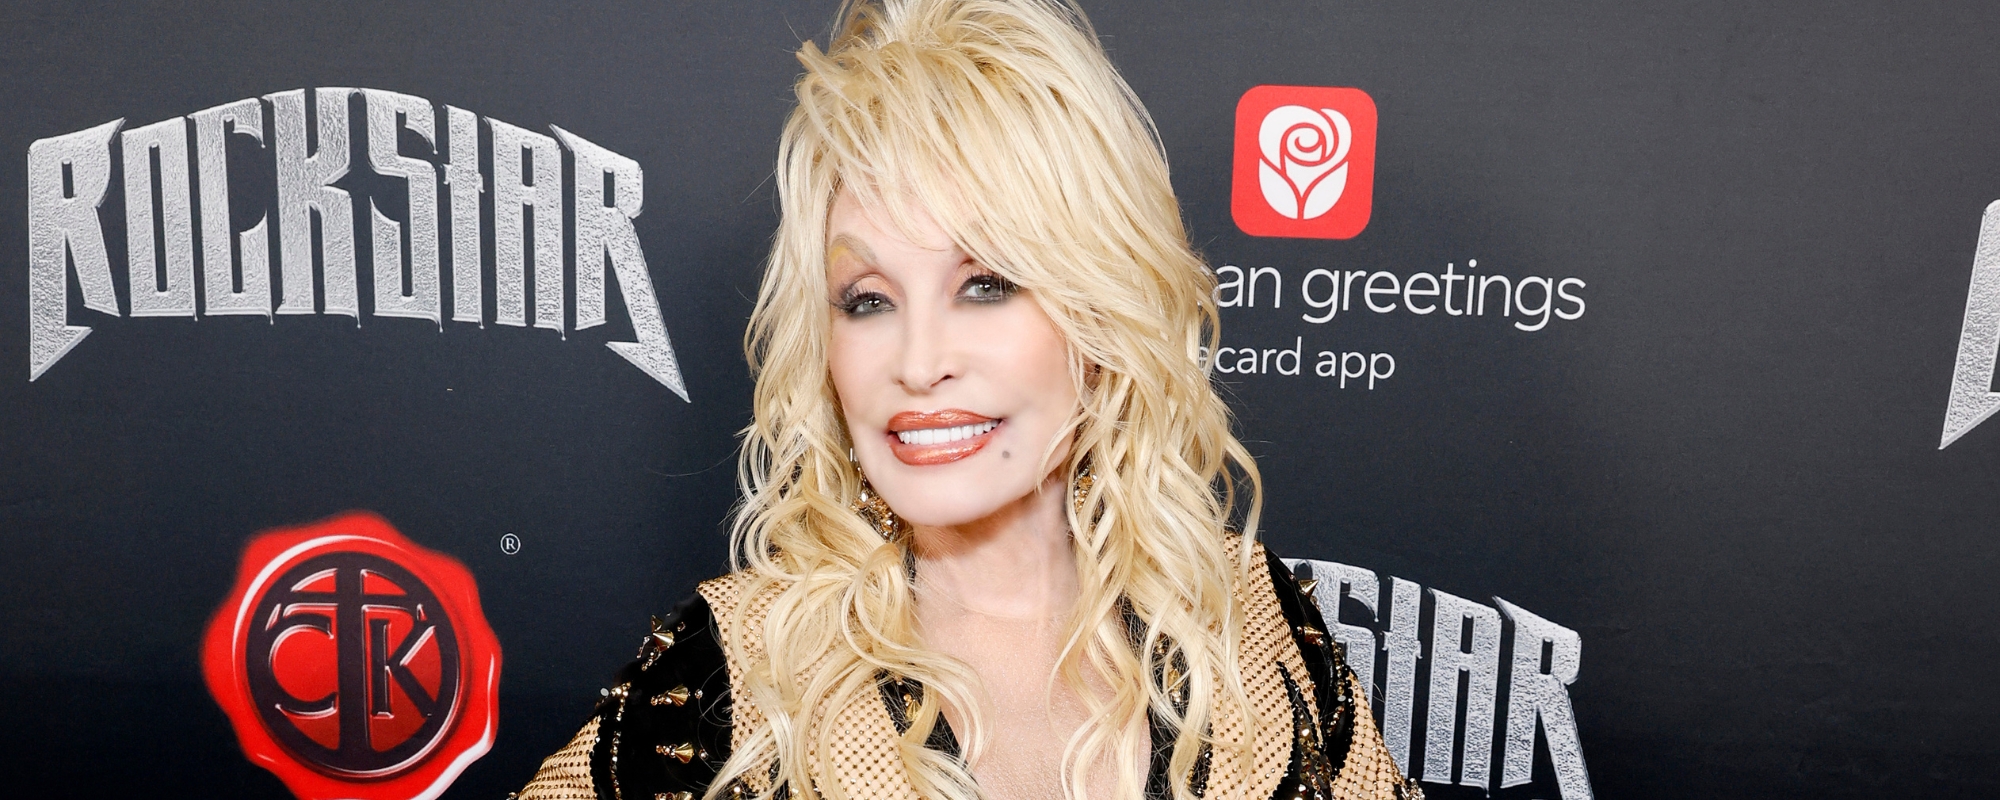 Dolly Parton Tells Fans They Can Find Her Latest Album ‘Rockstar’ at Their Local Dollar General